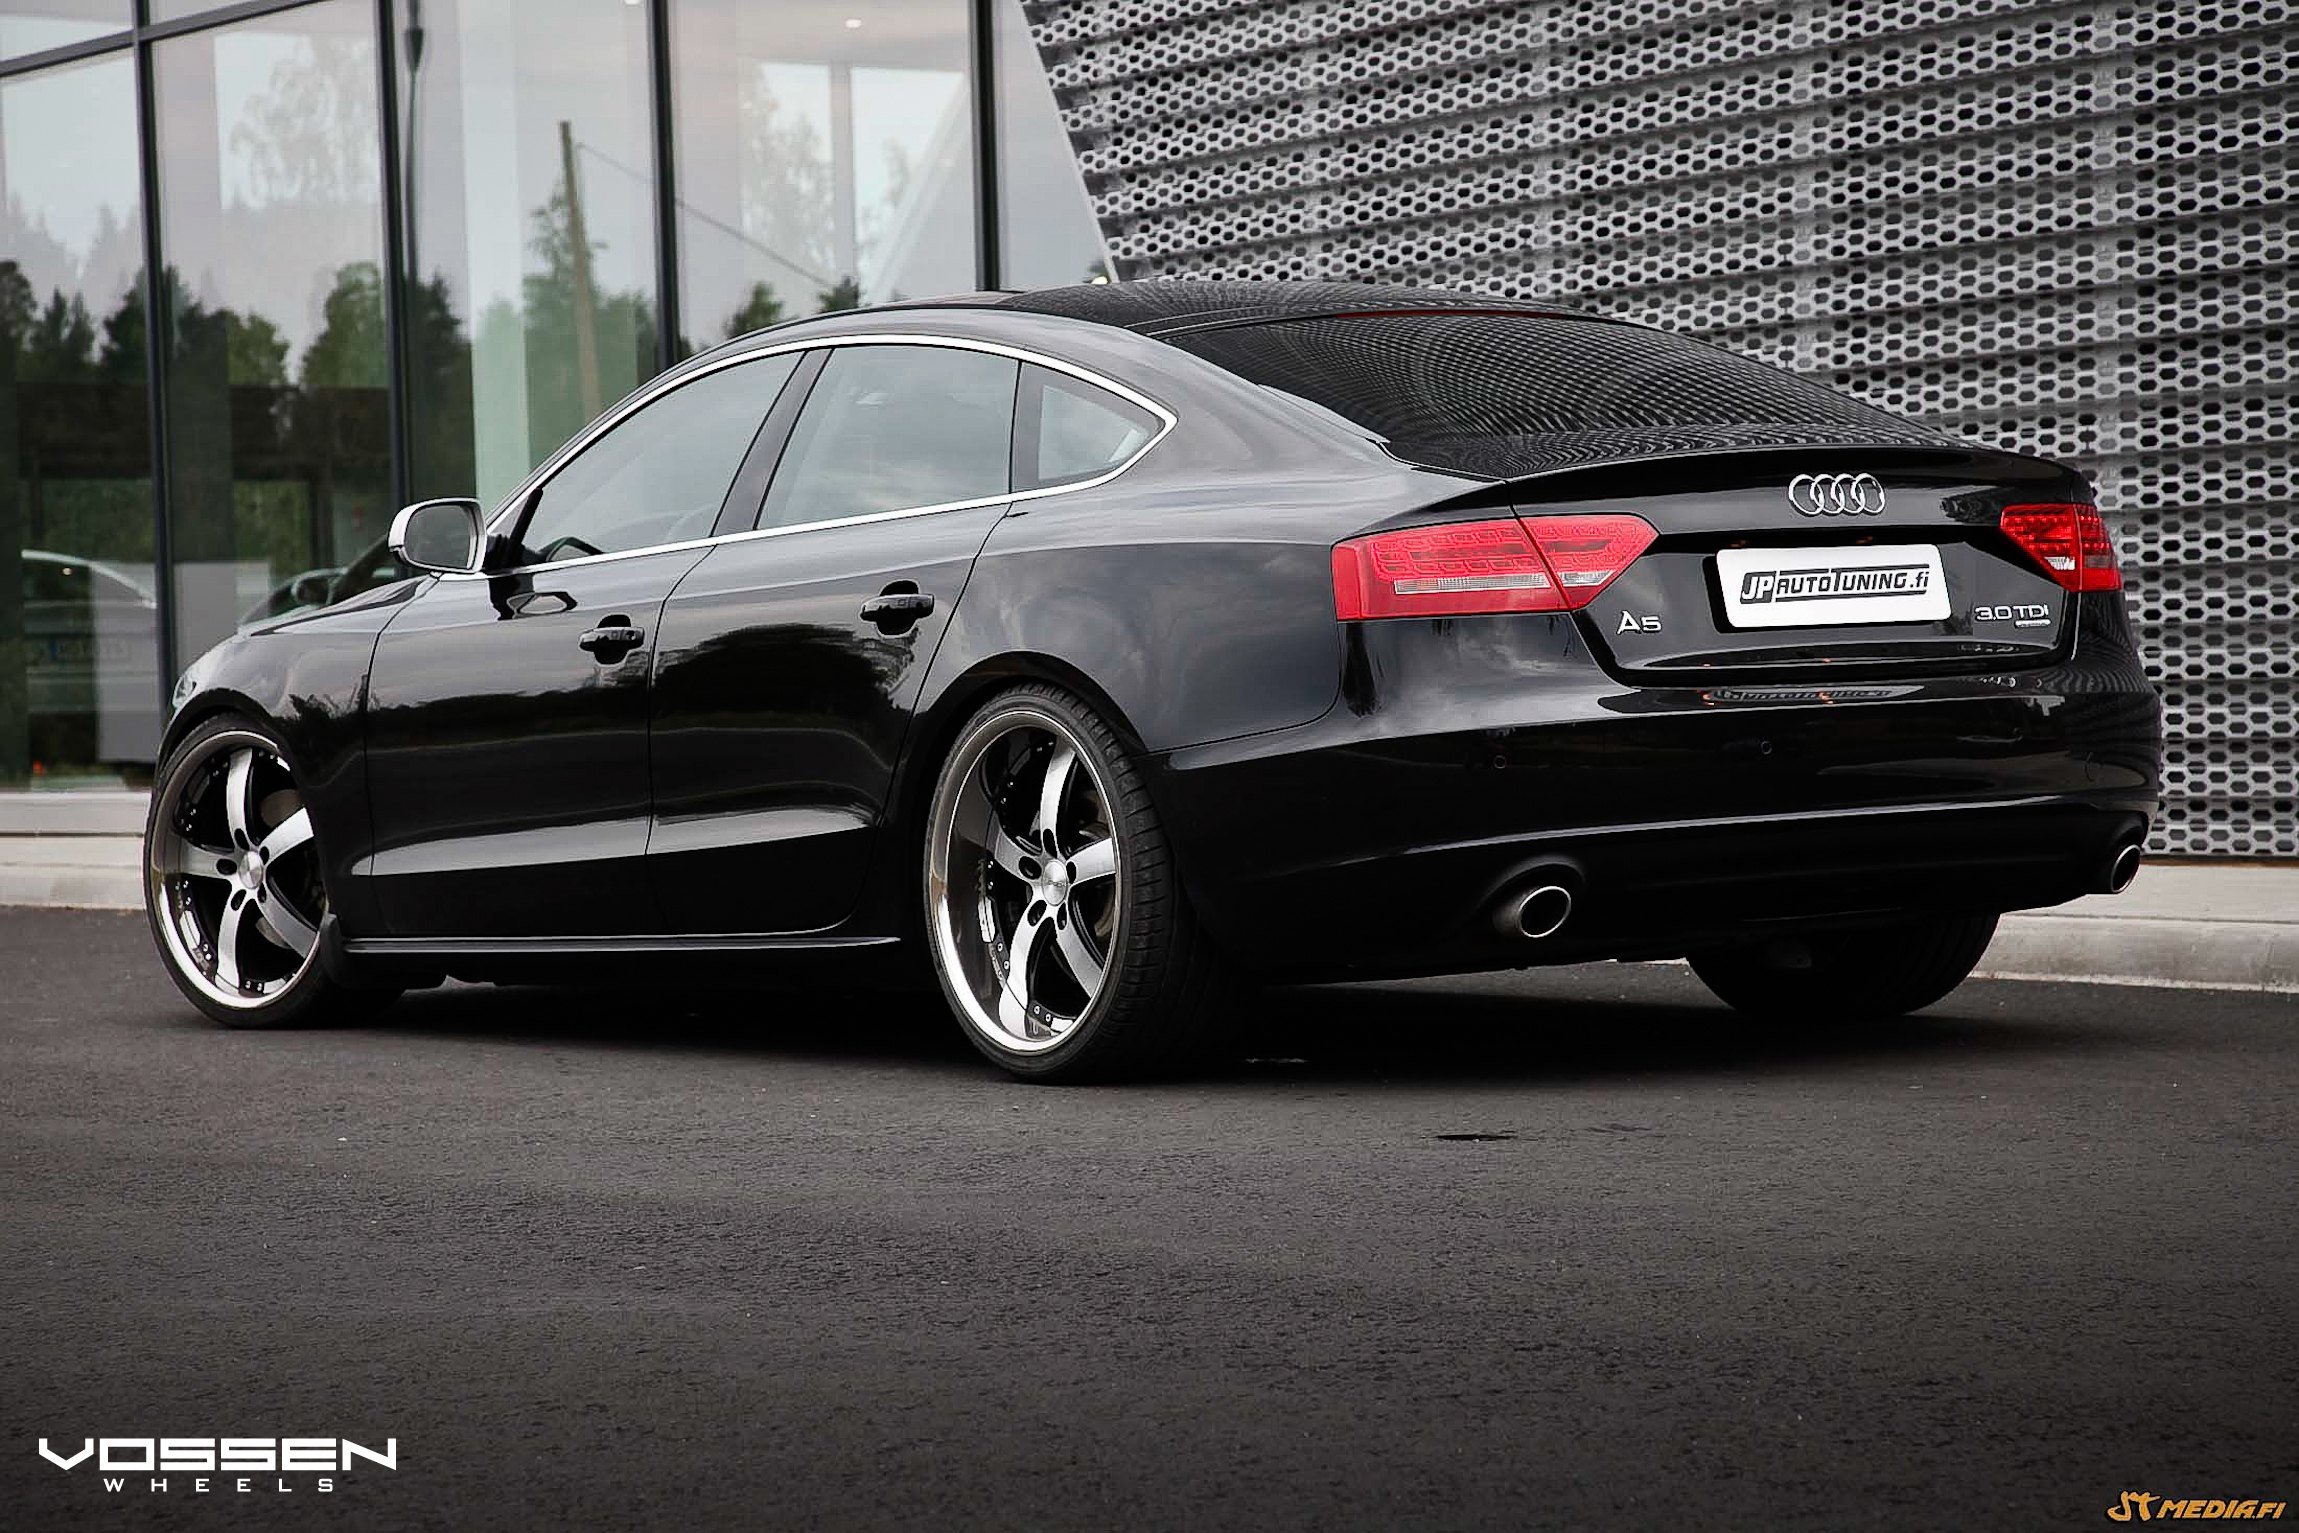 Black Audi A5 3.0 with Aftermarket Taillights - Photo by Vossen